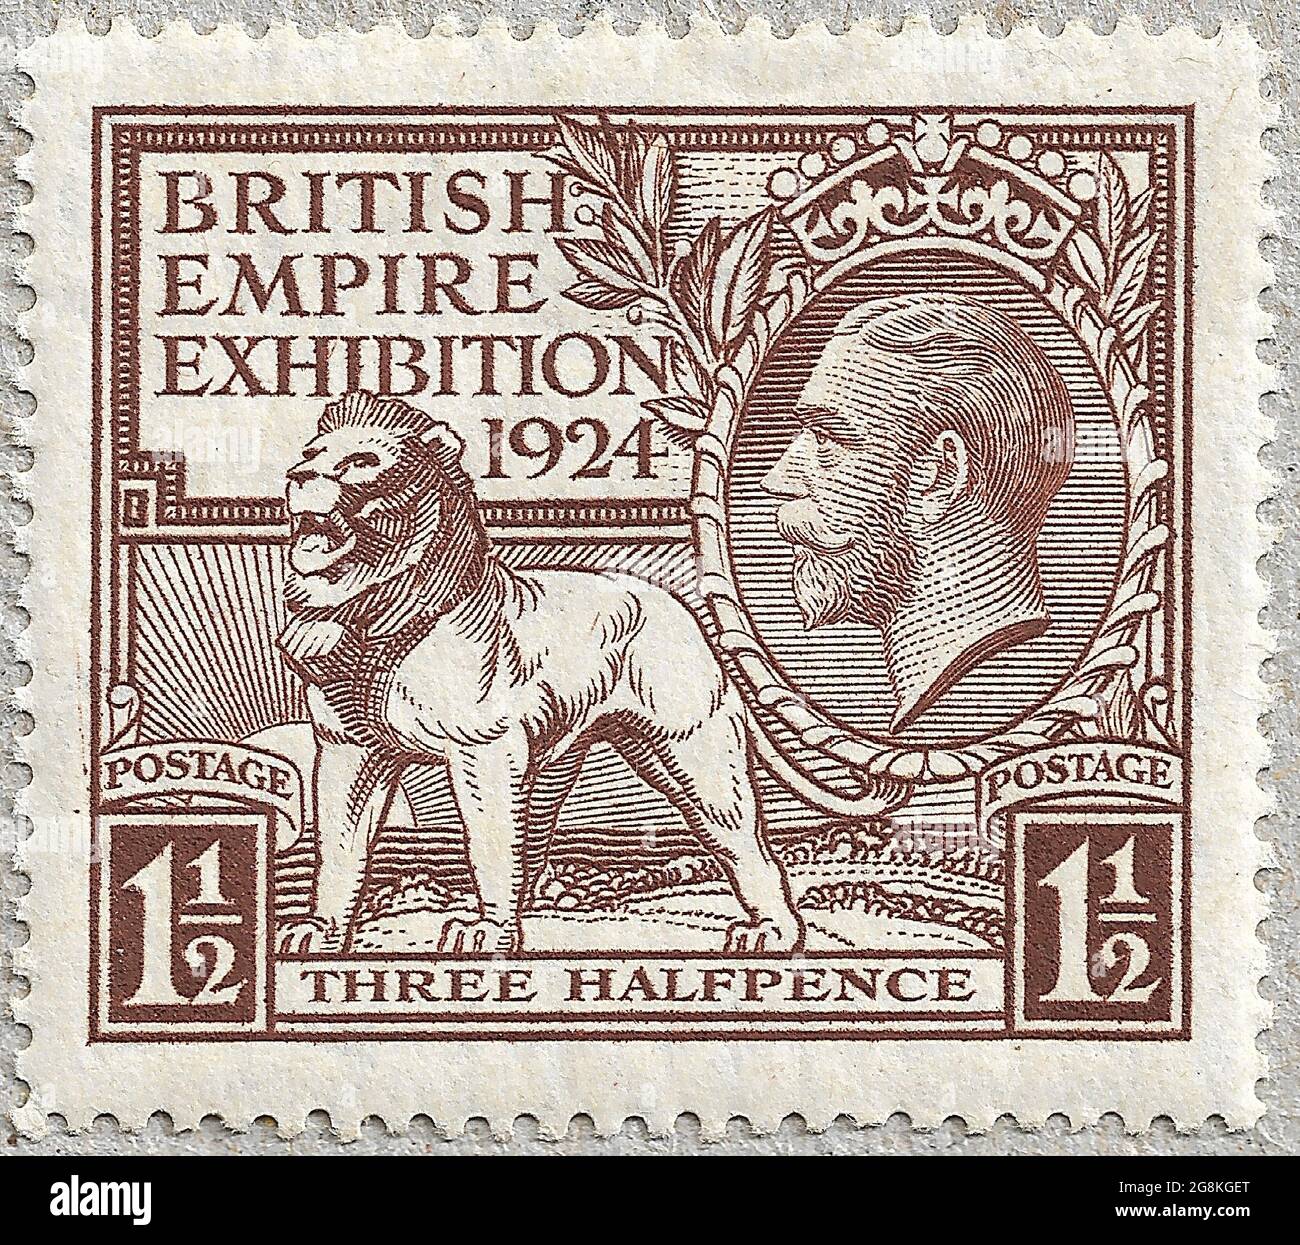 1924 British Empire Exhibition 'Wembley' Stamps (Great Britain, King George V) Three halfpence Brown Designed by H. Nelson. Printing plates engraved by J. A. C. Harrison. Printed by Waterlow and Sons. Stock Photo